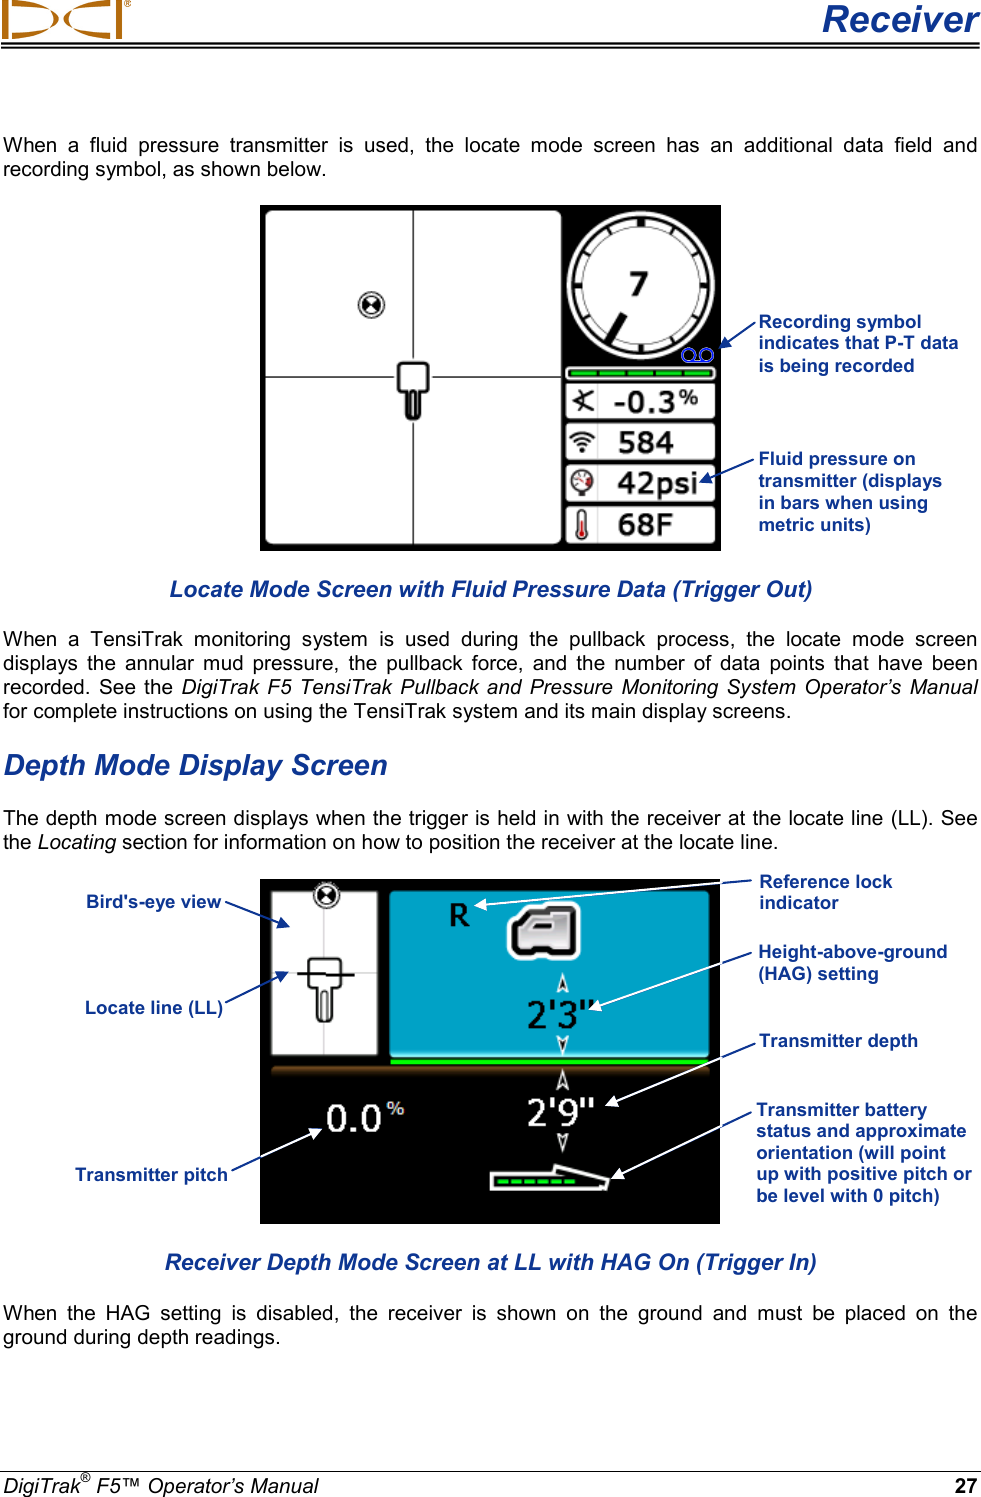  Receiver DigiTrak® F5™ Operator’s Manual 27 When a fluid pressure transmitter is used, the locate mode screen has an additional data  field  and recording symbol, as shown below.   Locate Mode Screen with Fluid Pressure Data (Trigger Out) When a TensiTrak monitoring system is used during the pullback process, the locate mode screen displays the annular mud pressure,  the pullback force,  and the number of data points  that  have been recorded. See the DigiTrak F5  TensiTrak  Pullback and Pressure Monitoring System Operator’s Manual for complete instructions on using the TensiTrak system and its main display screens. Depth Mode Display Screen The depth mode screen displays when the trigger is held in with the receiver at the locate line (LL). See the Locating section for information on how to position the receiver at the locate line.   Receiver Depth Mode Screen at LL with HAG On (Trigger In) When the HAG setting is disabled, the receiver is shown on the ground and  must be placed on the ground during depth readings.  Height-above-ground (HAG) setting  Locate line (LL) Transmitter depth  Transmitter pitch  Bird&apos;s-eye view Transmitter battery status and approximate orientation (will point up with positive pitch or be level with 0 pitch)  Reference lock indicator  Fluid pressure on transmitter (displays in bars when using metric units) Recording symbol indicates that P-T data is being recorded  